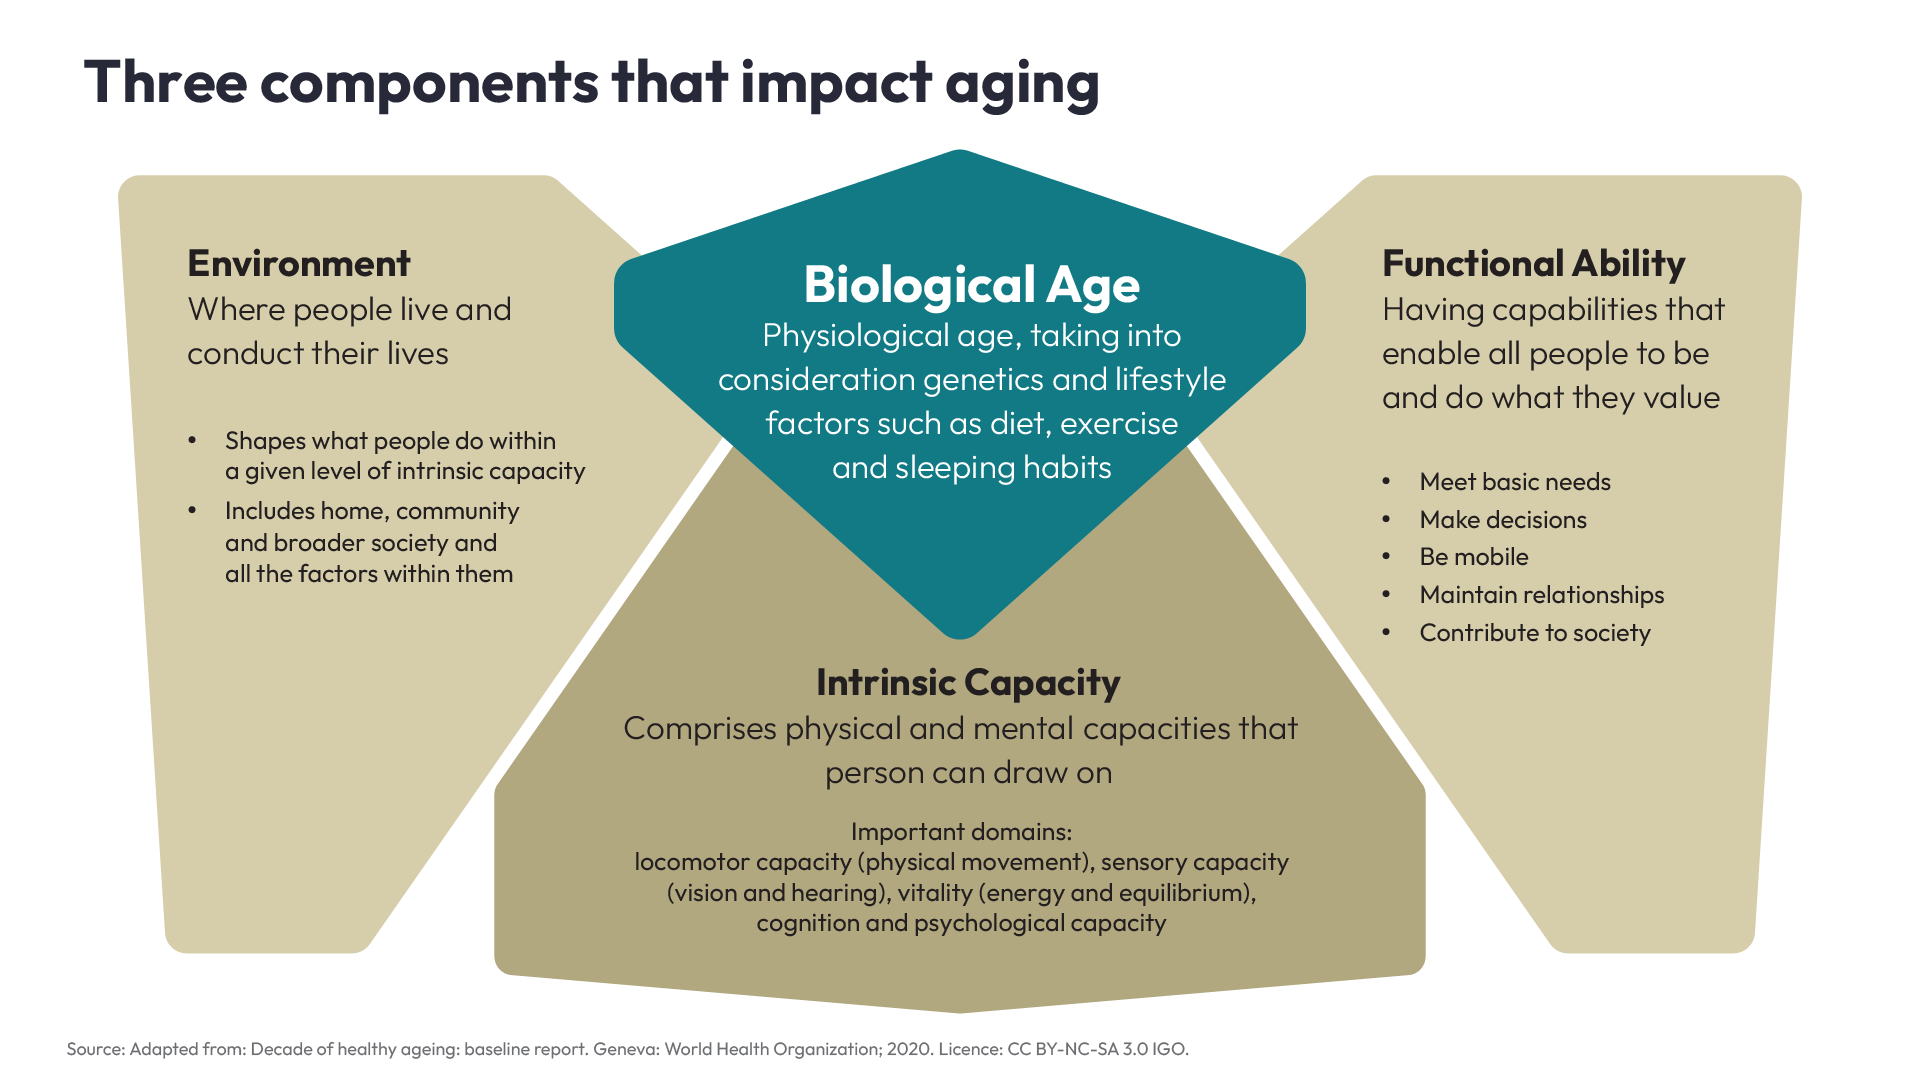 Components that impact aging